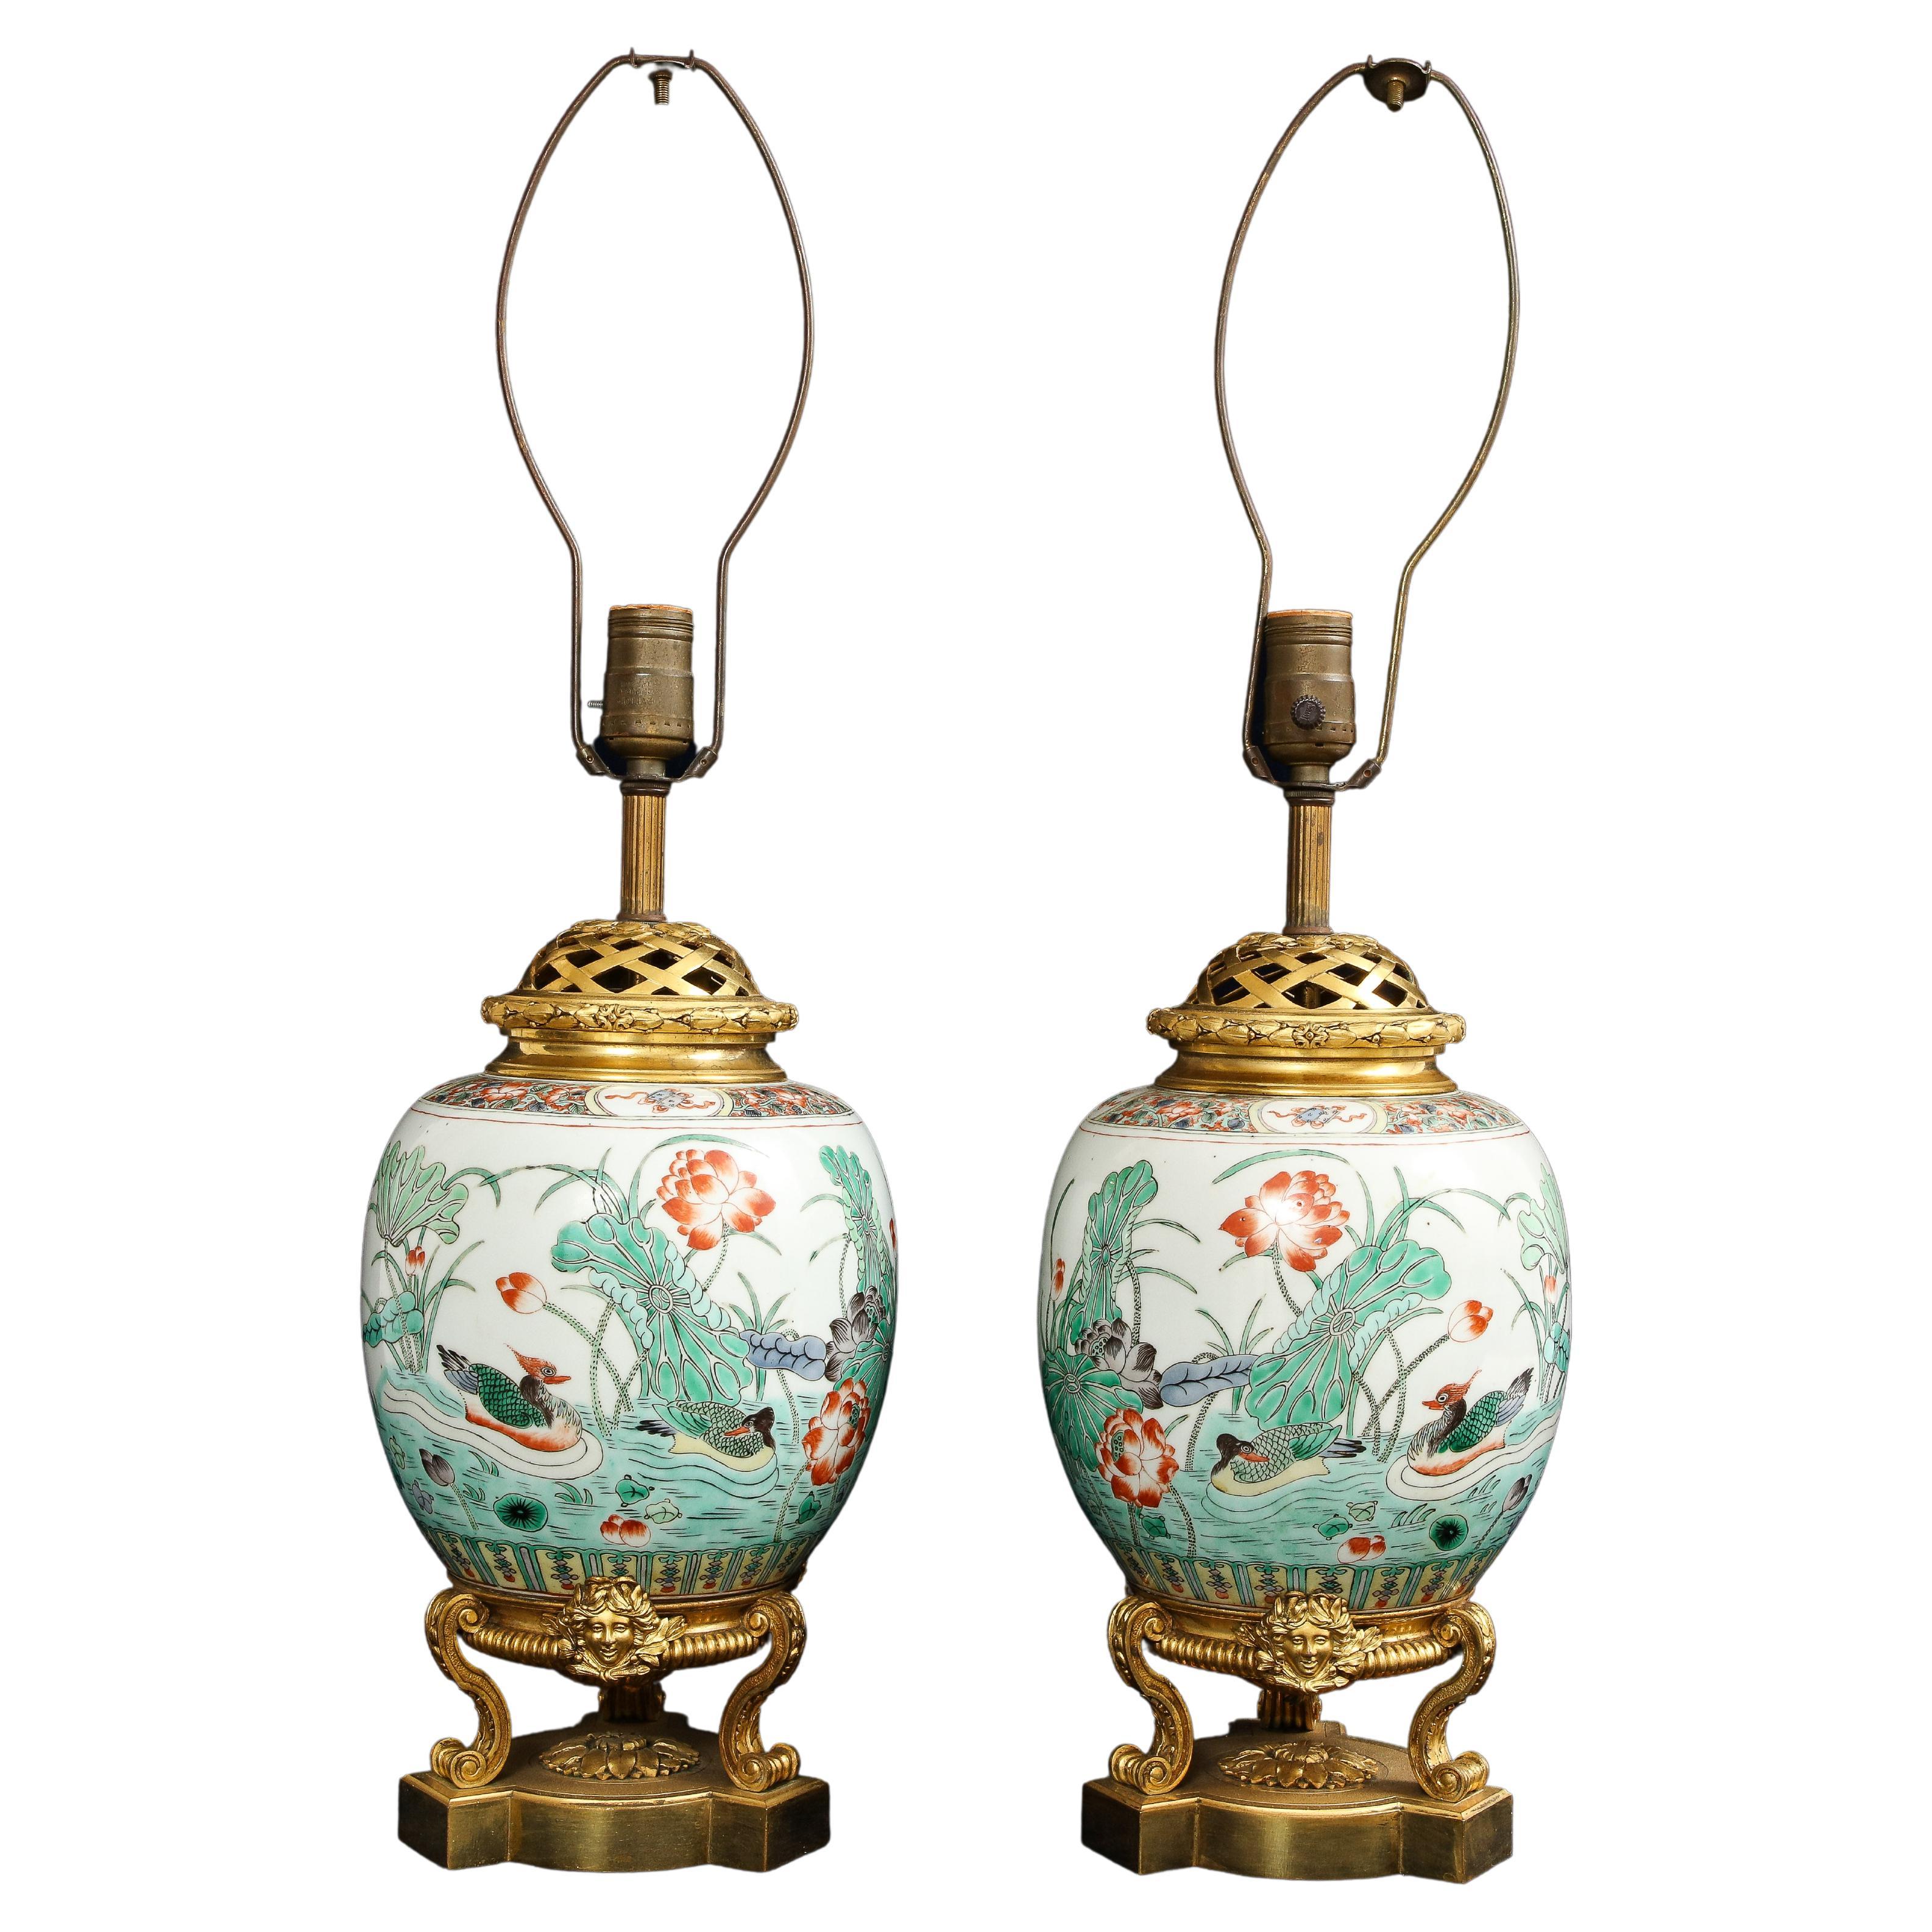 Pair 19th C Ormolu Mounted Chinese Famille Verte Porcelain Vases Turned to Lamps